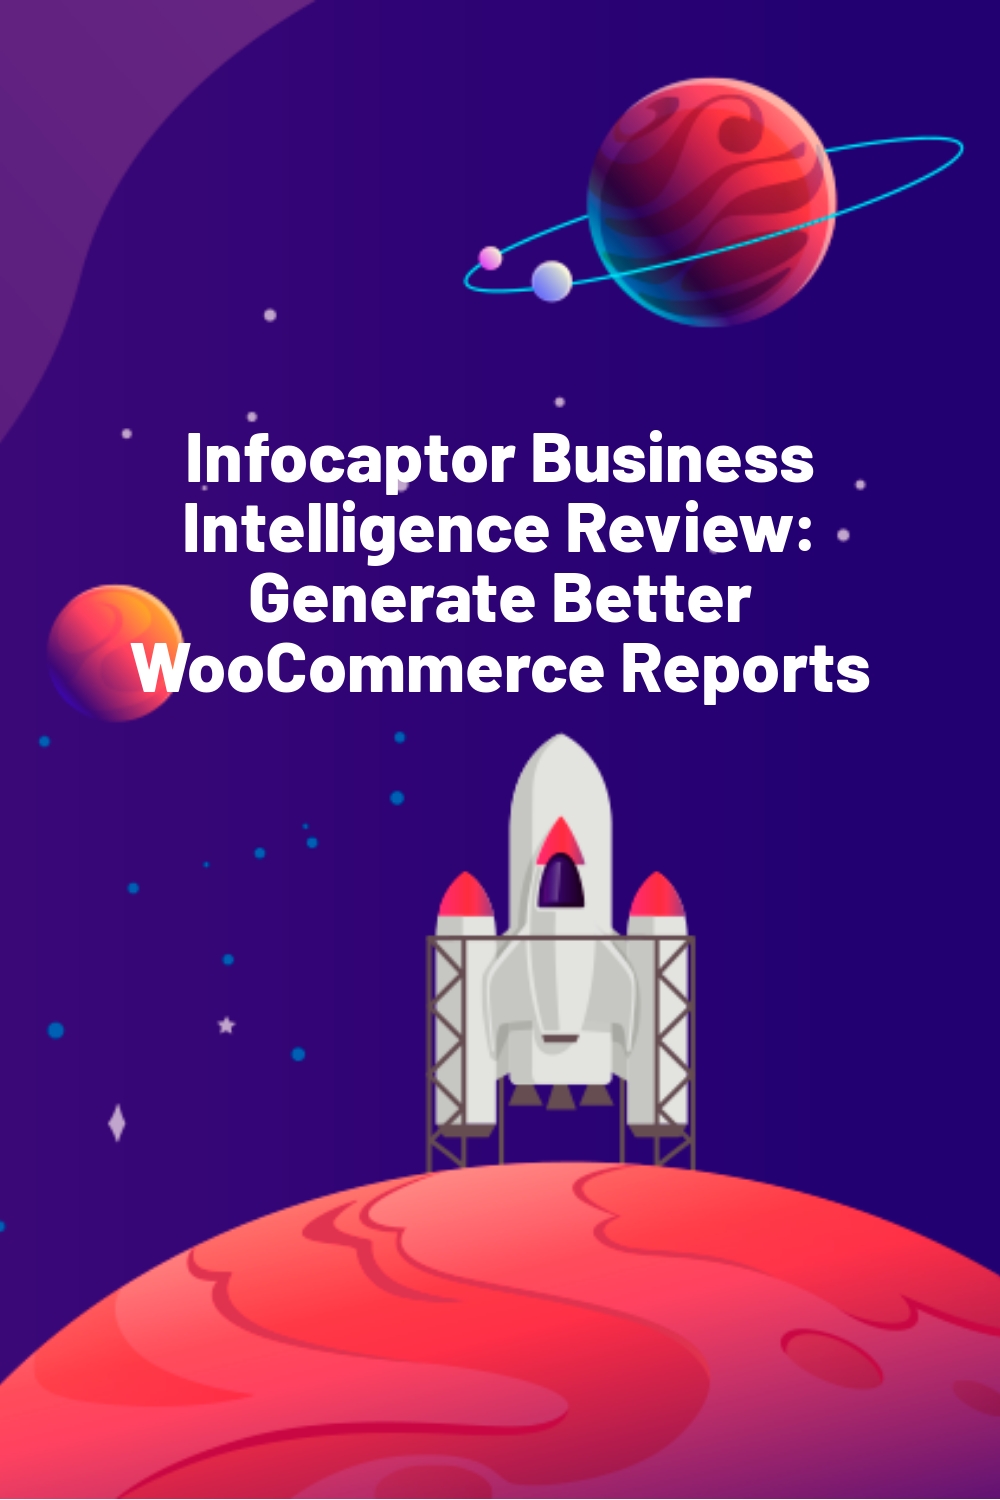 Infocaptor Business Intelligence Review: Generate Better WooCommerce Reports